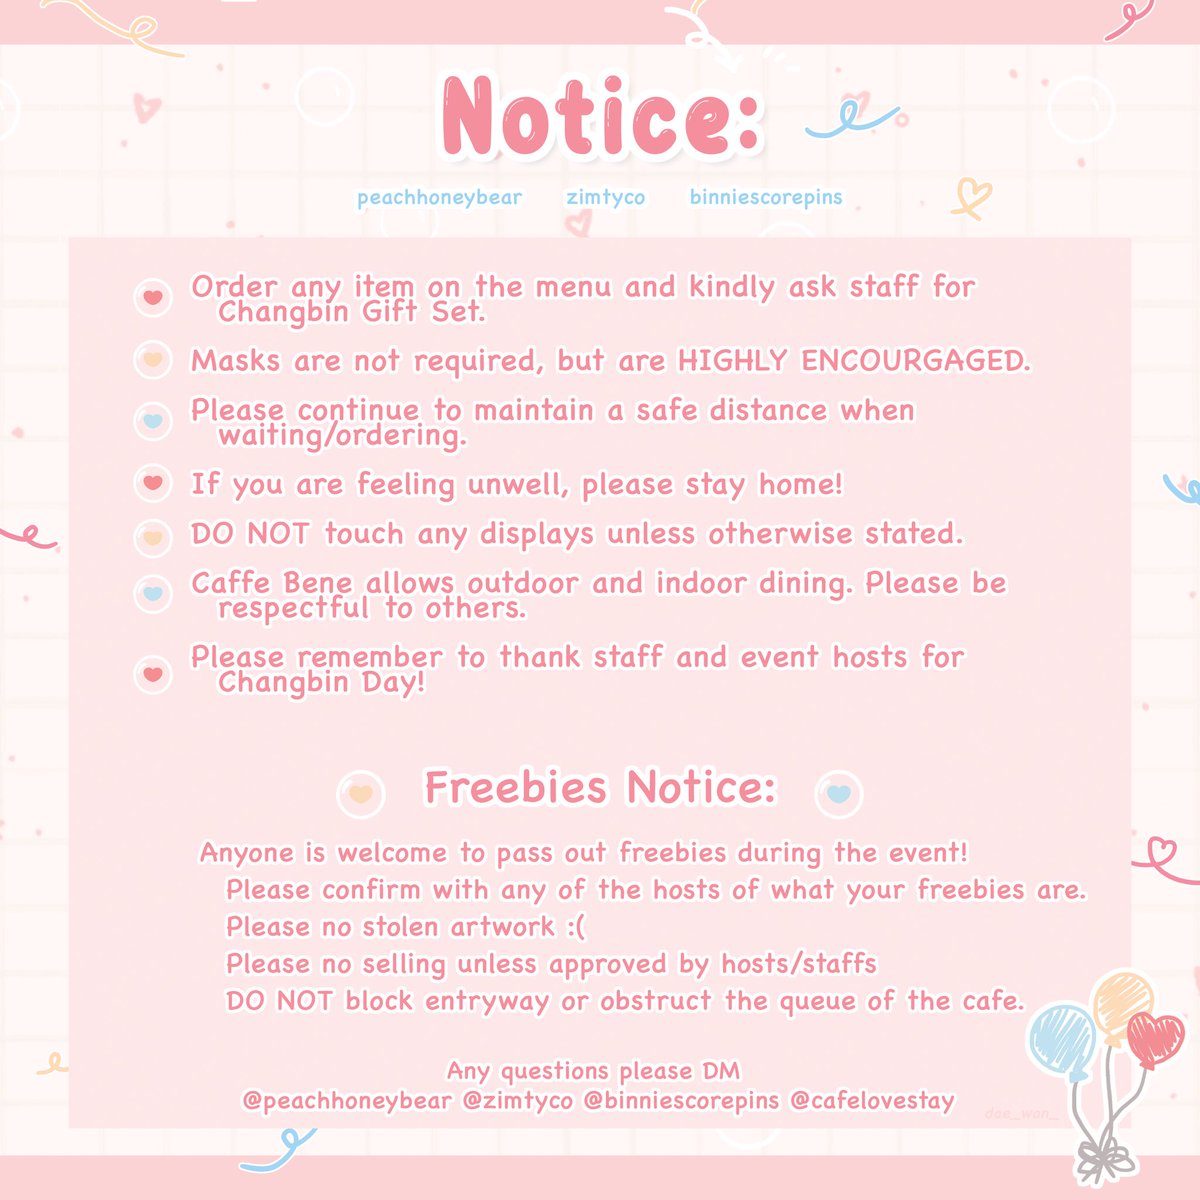 Cafe + Freebie Notice💓

Here are some guidelines for our event this weekend including etiquette and freebie notifications! We will also be giving away some albums (No PCs) provided by many lovely individuals!

See you there at #LoveyDoveyChangbin Day!🥰